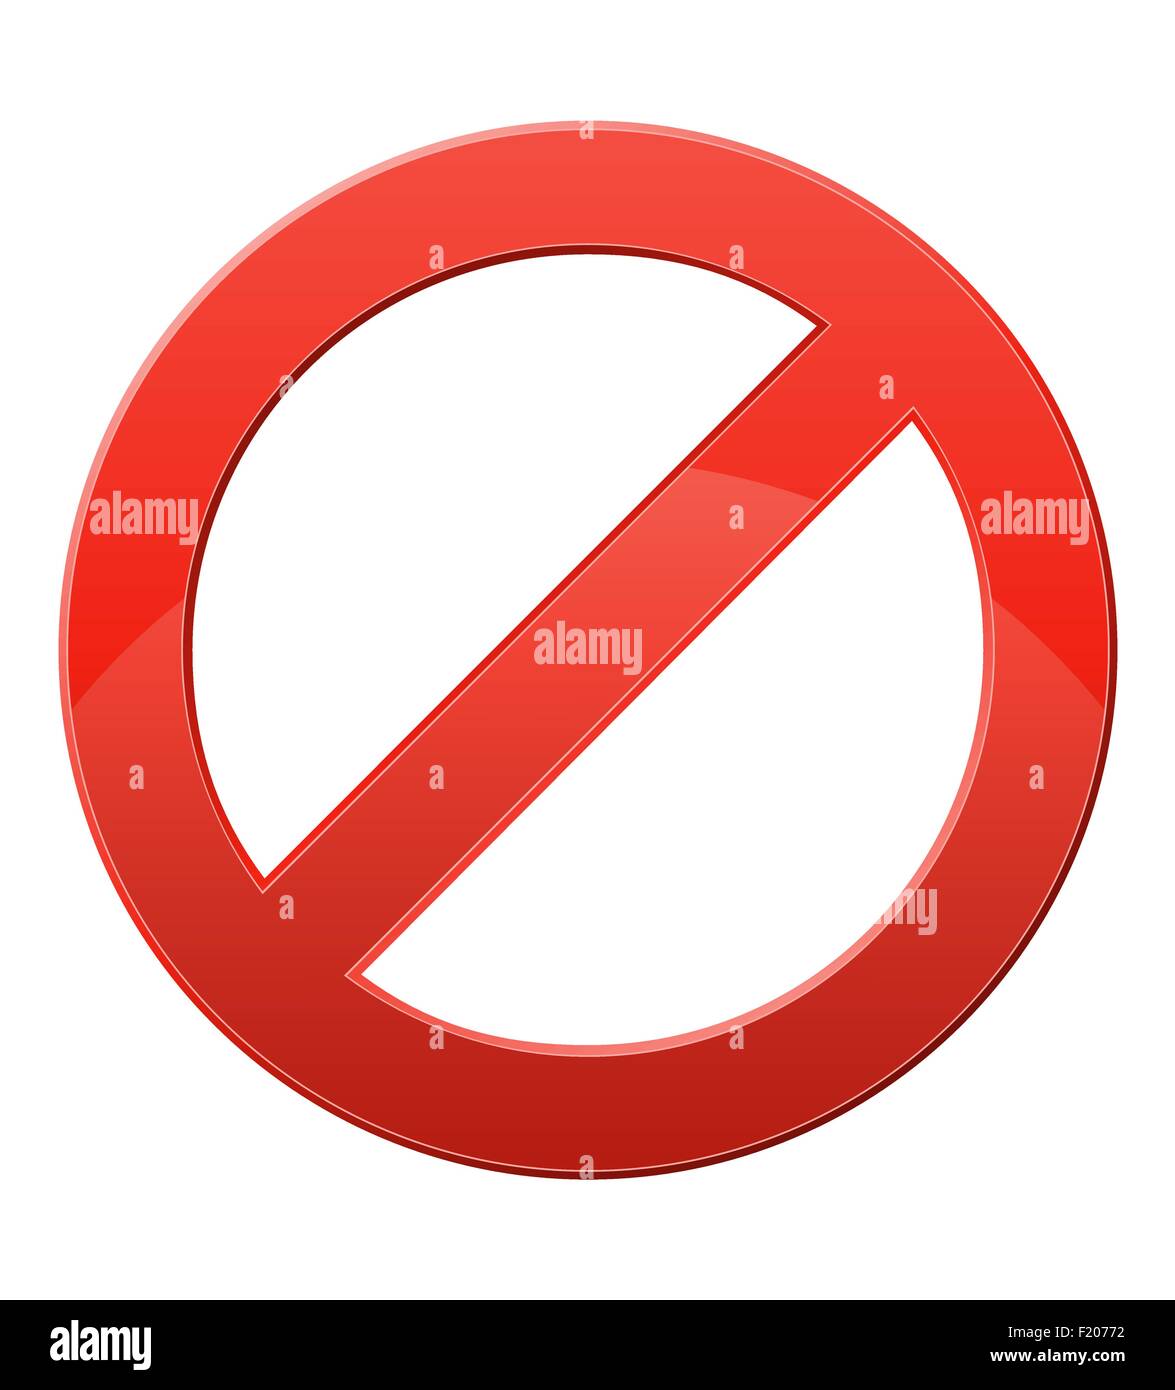 prohibitory sign vector illustration isolated on white background Stock Vector